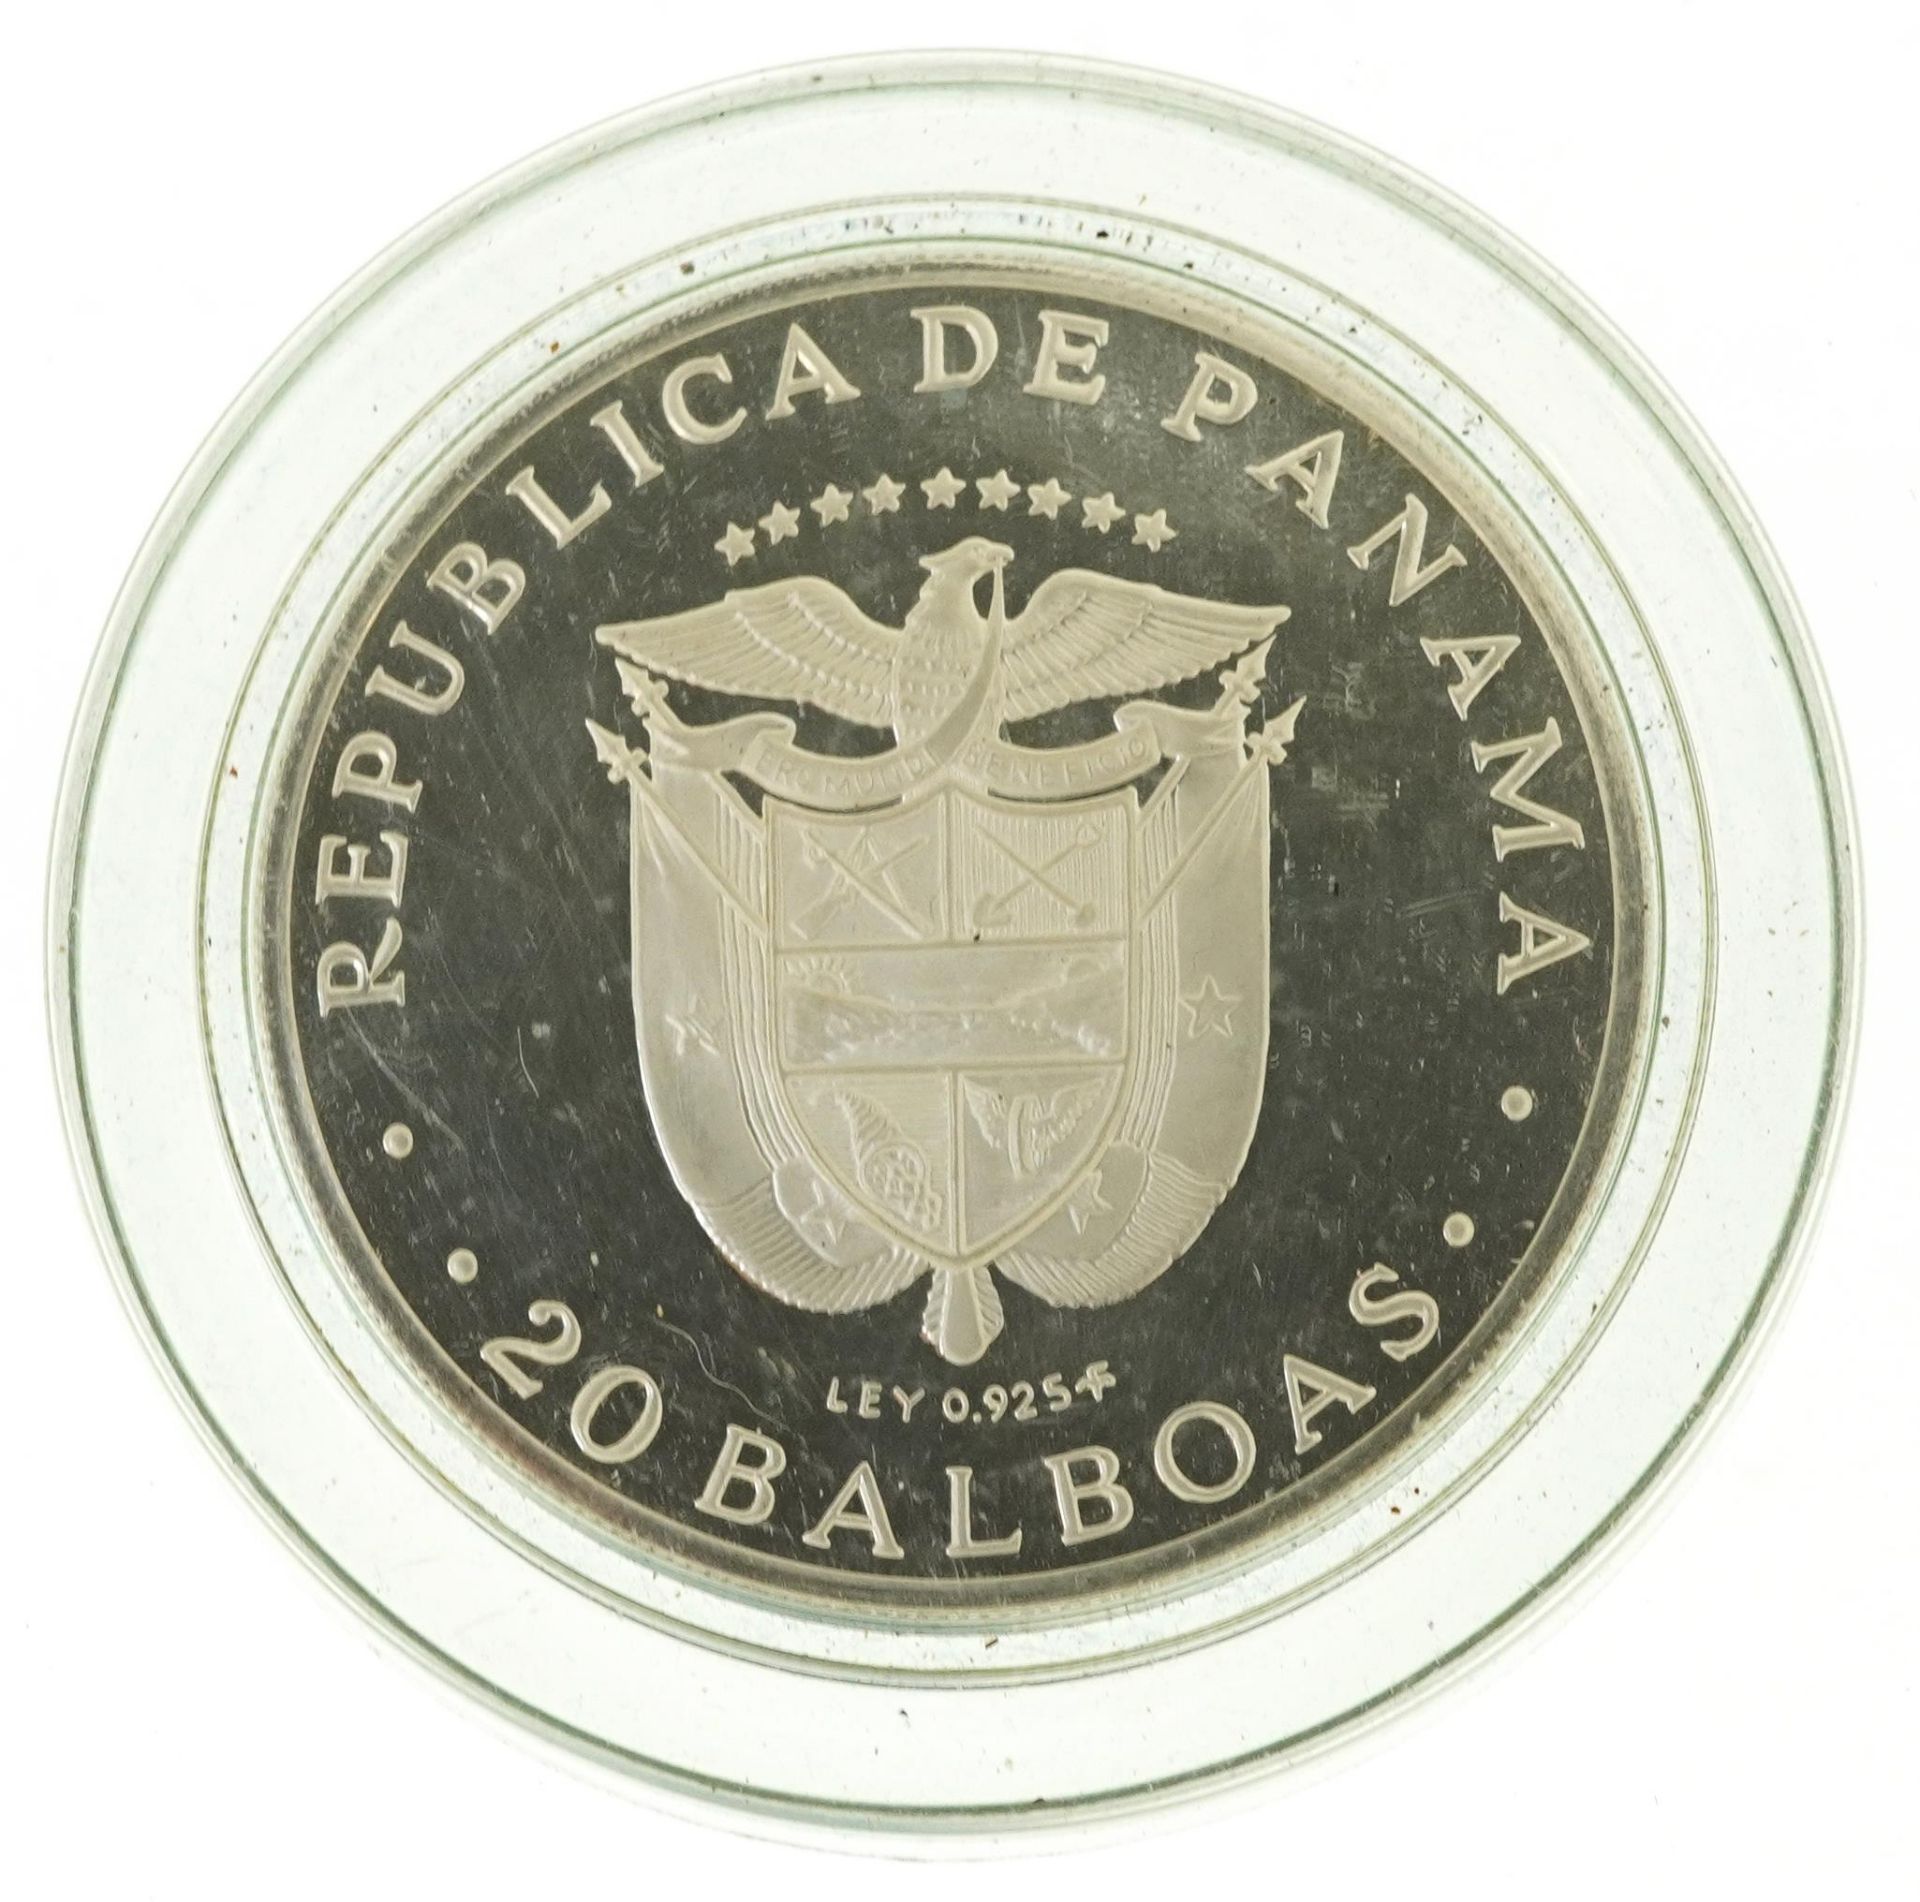 The Republic of Panama 1974 silver twenty Balboas : For further information on this lot please visit